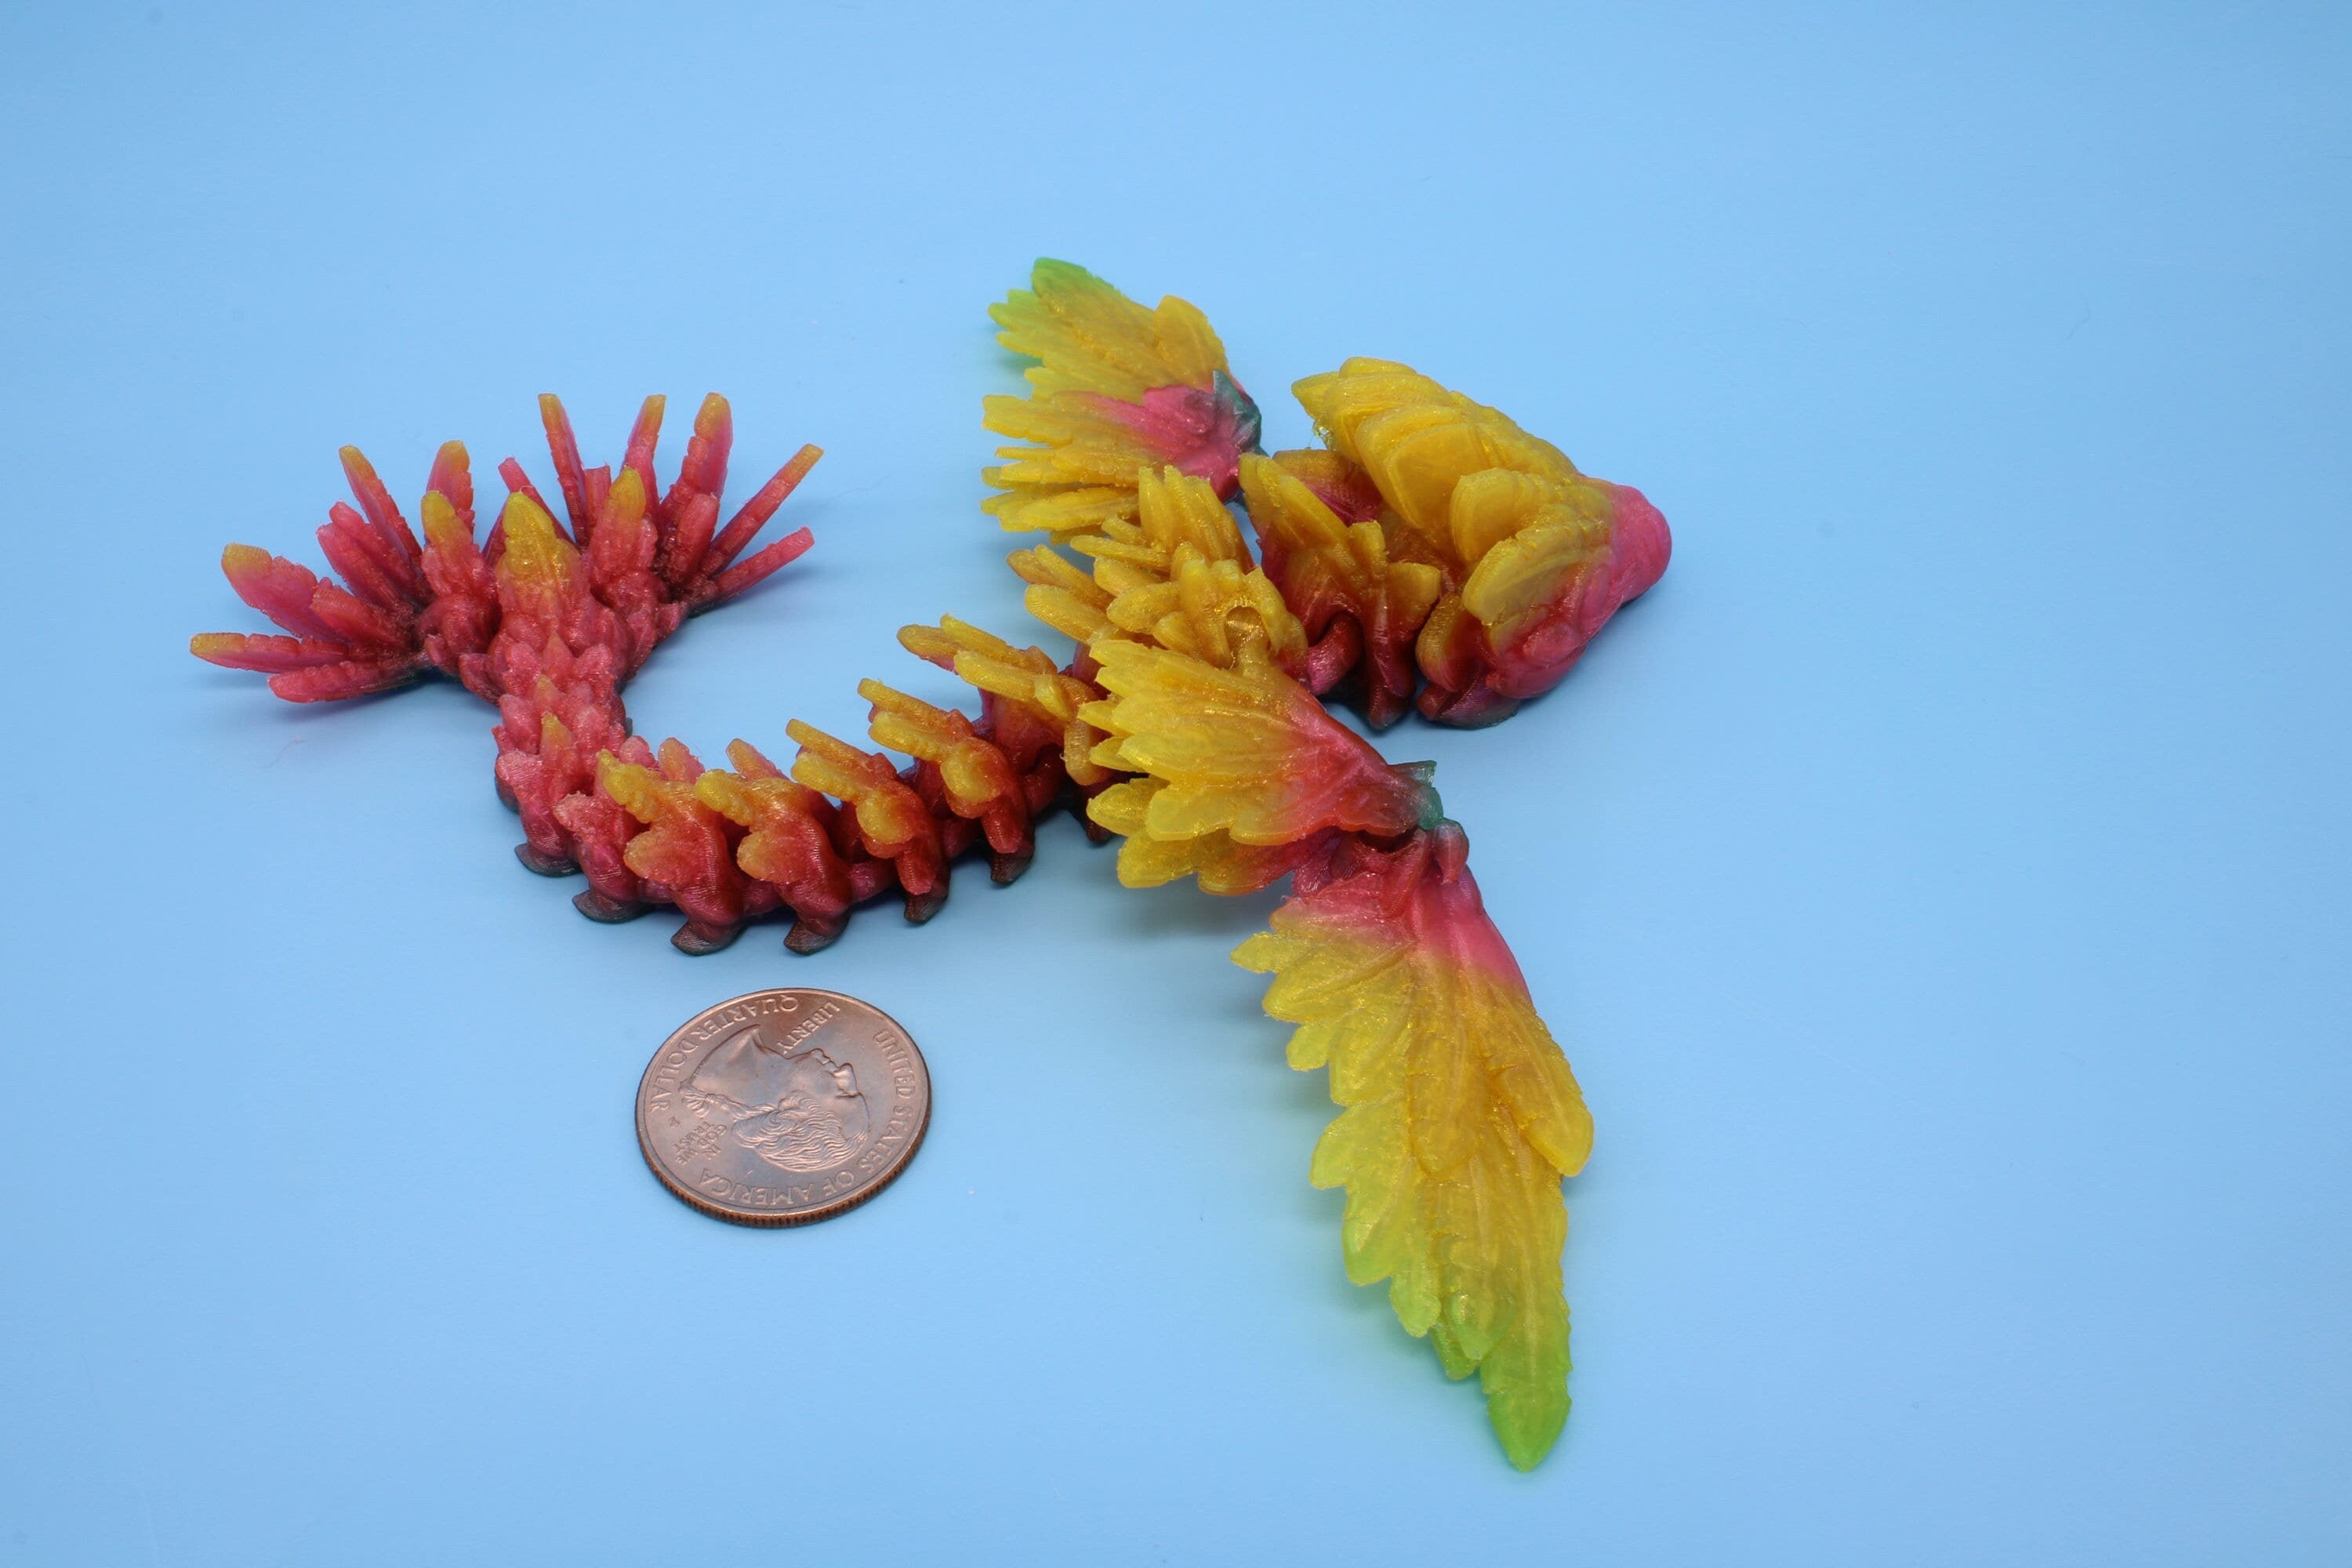 Miniature Baby Flying Serpent Dragon Rainbow 3D printed articulating Toy Fidget Flexi Toy 7 in. head to tail Stress Relief Gift